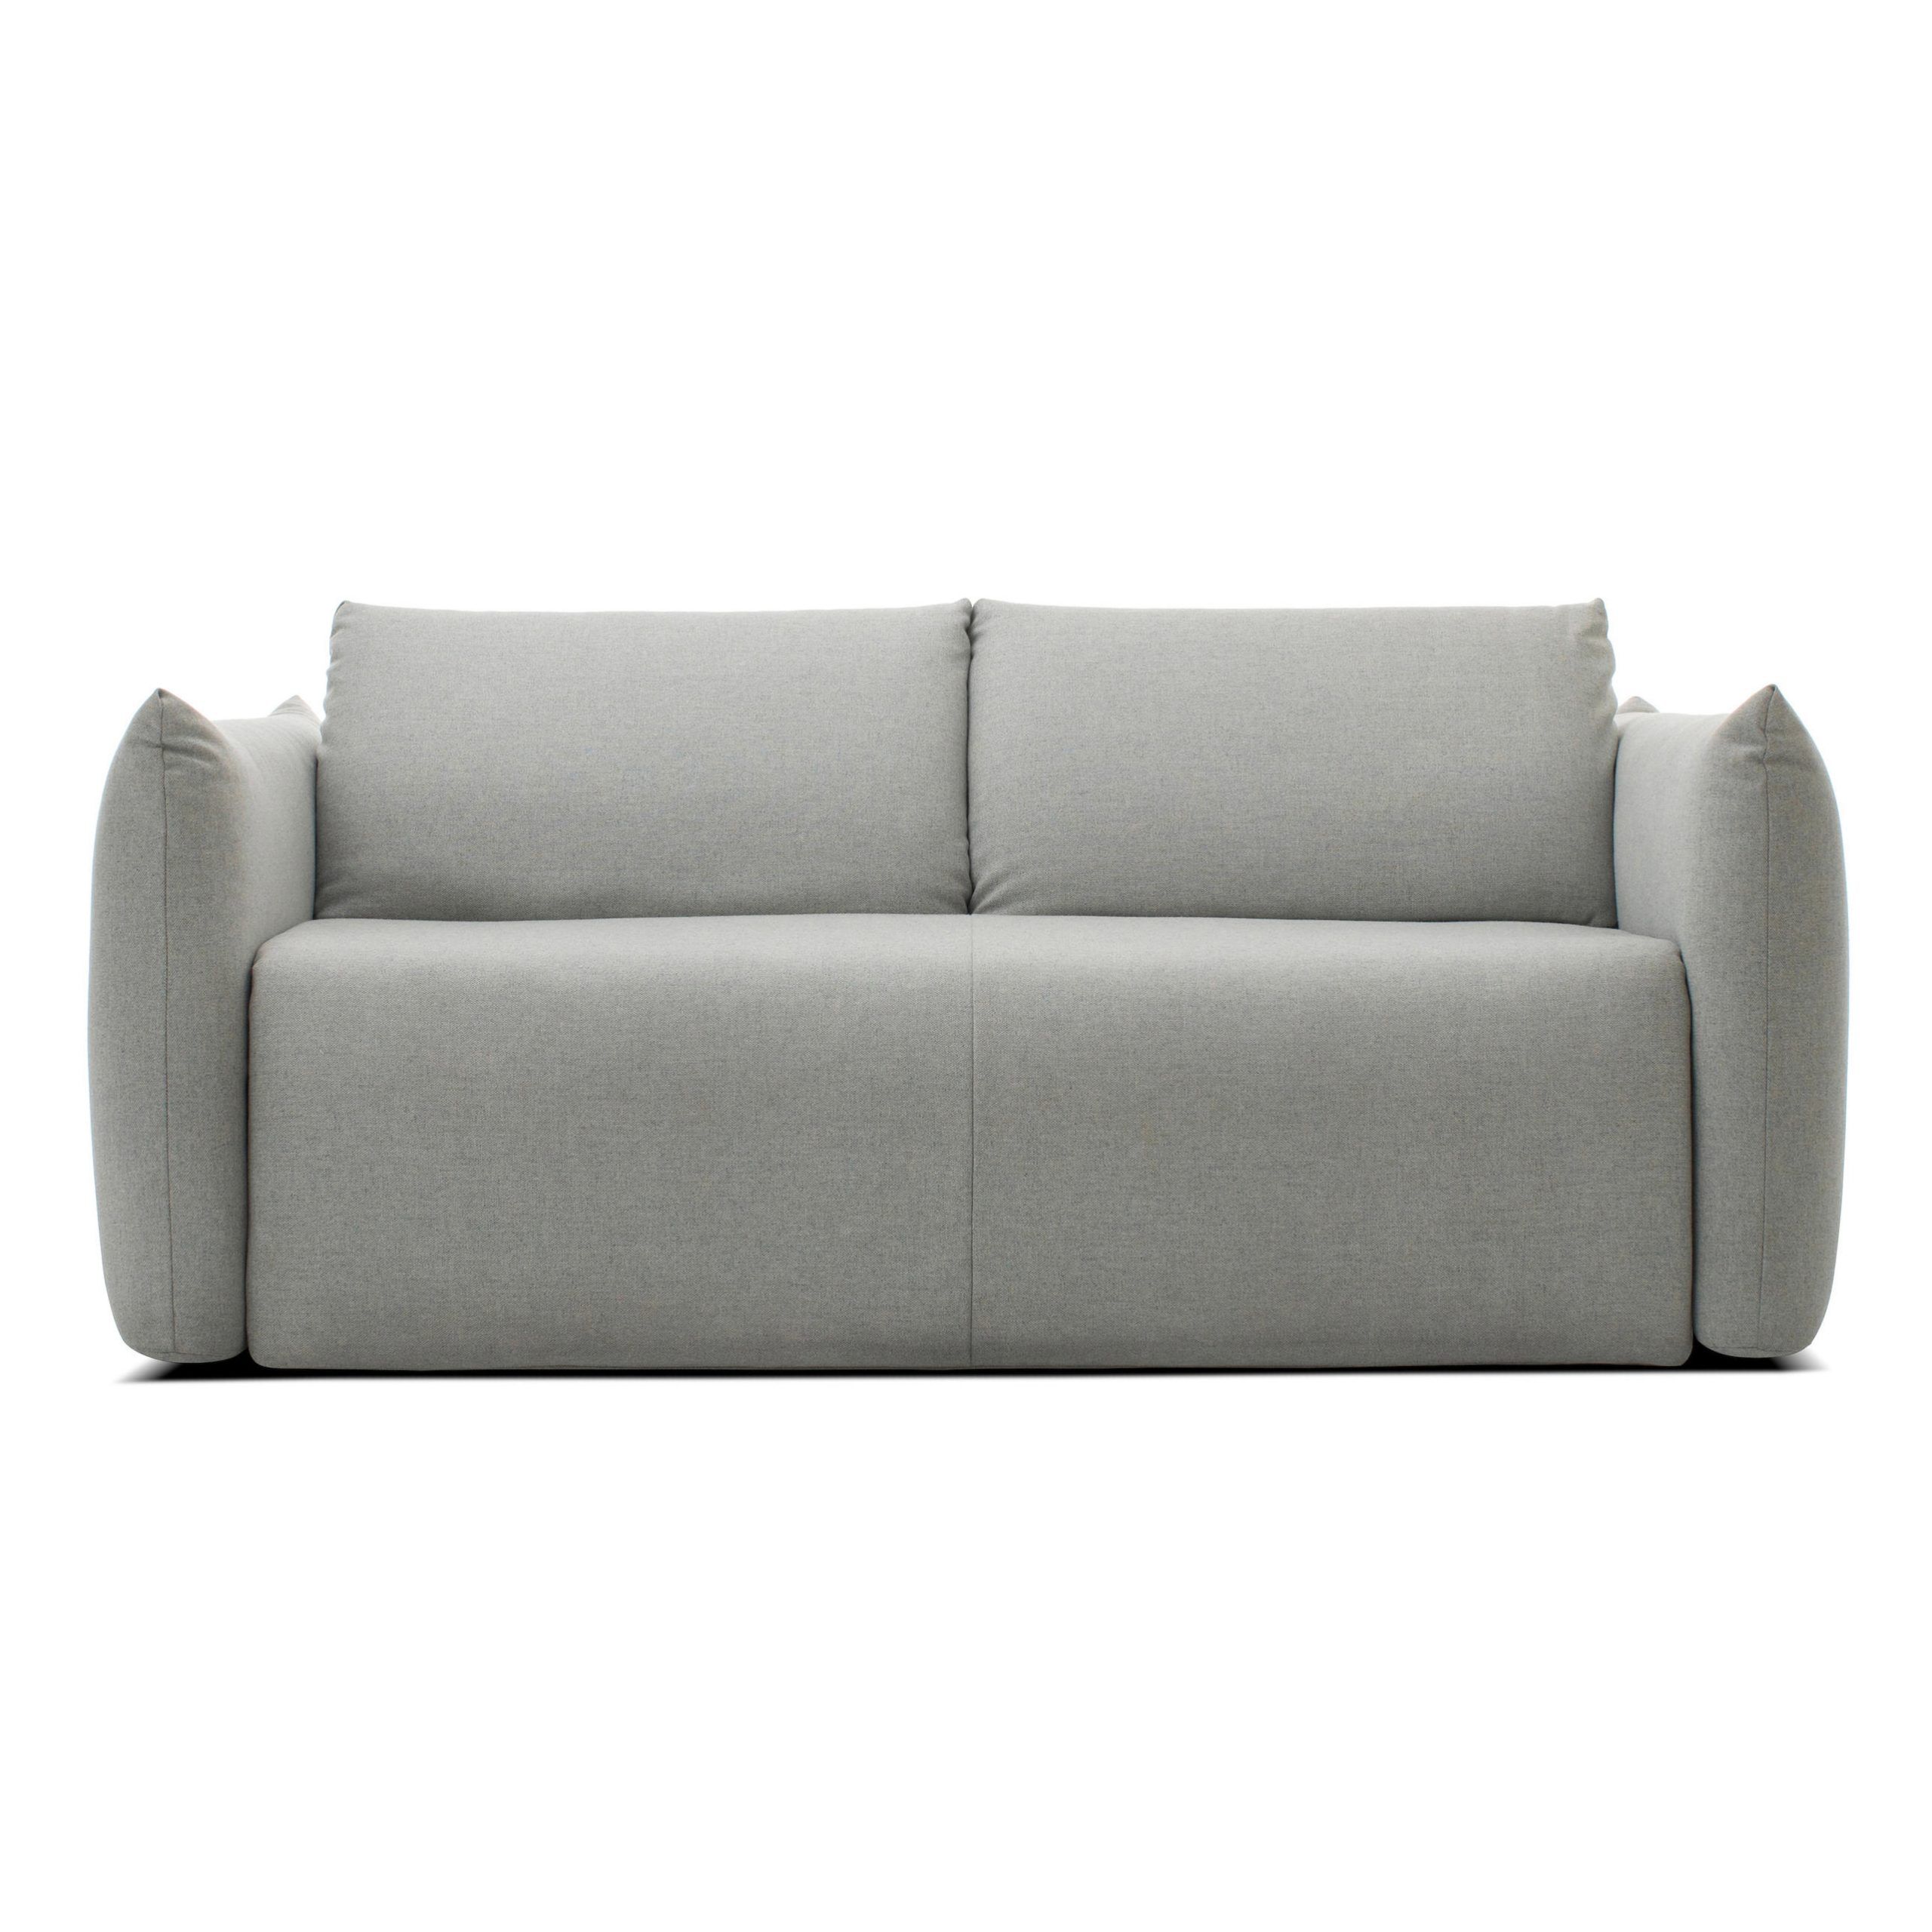 Luna Sofa Bed – Sofas From Extraform | Architonic Intended For Luna Leather Sectional Sofas (Photo 11 of 15)